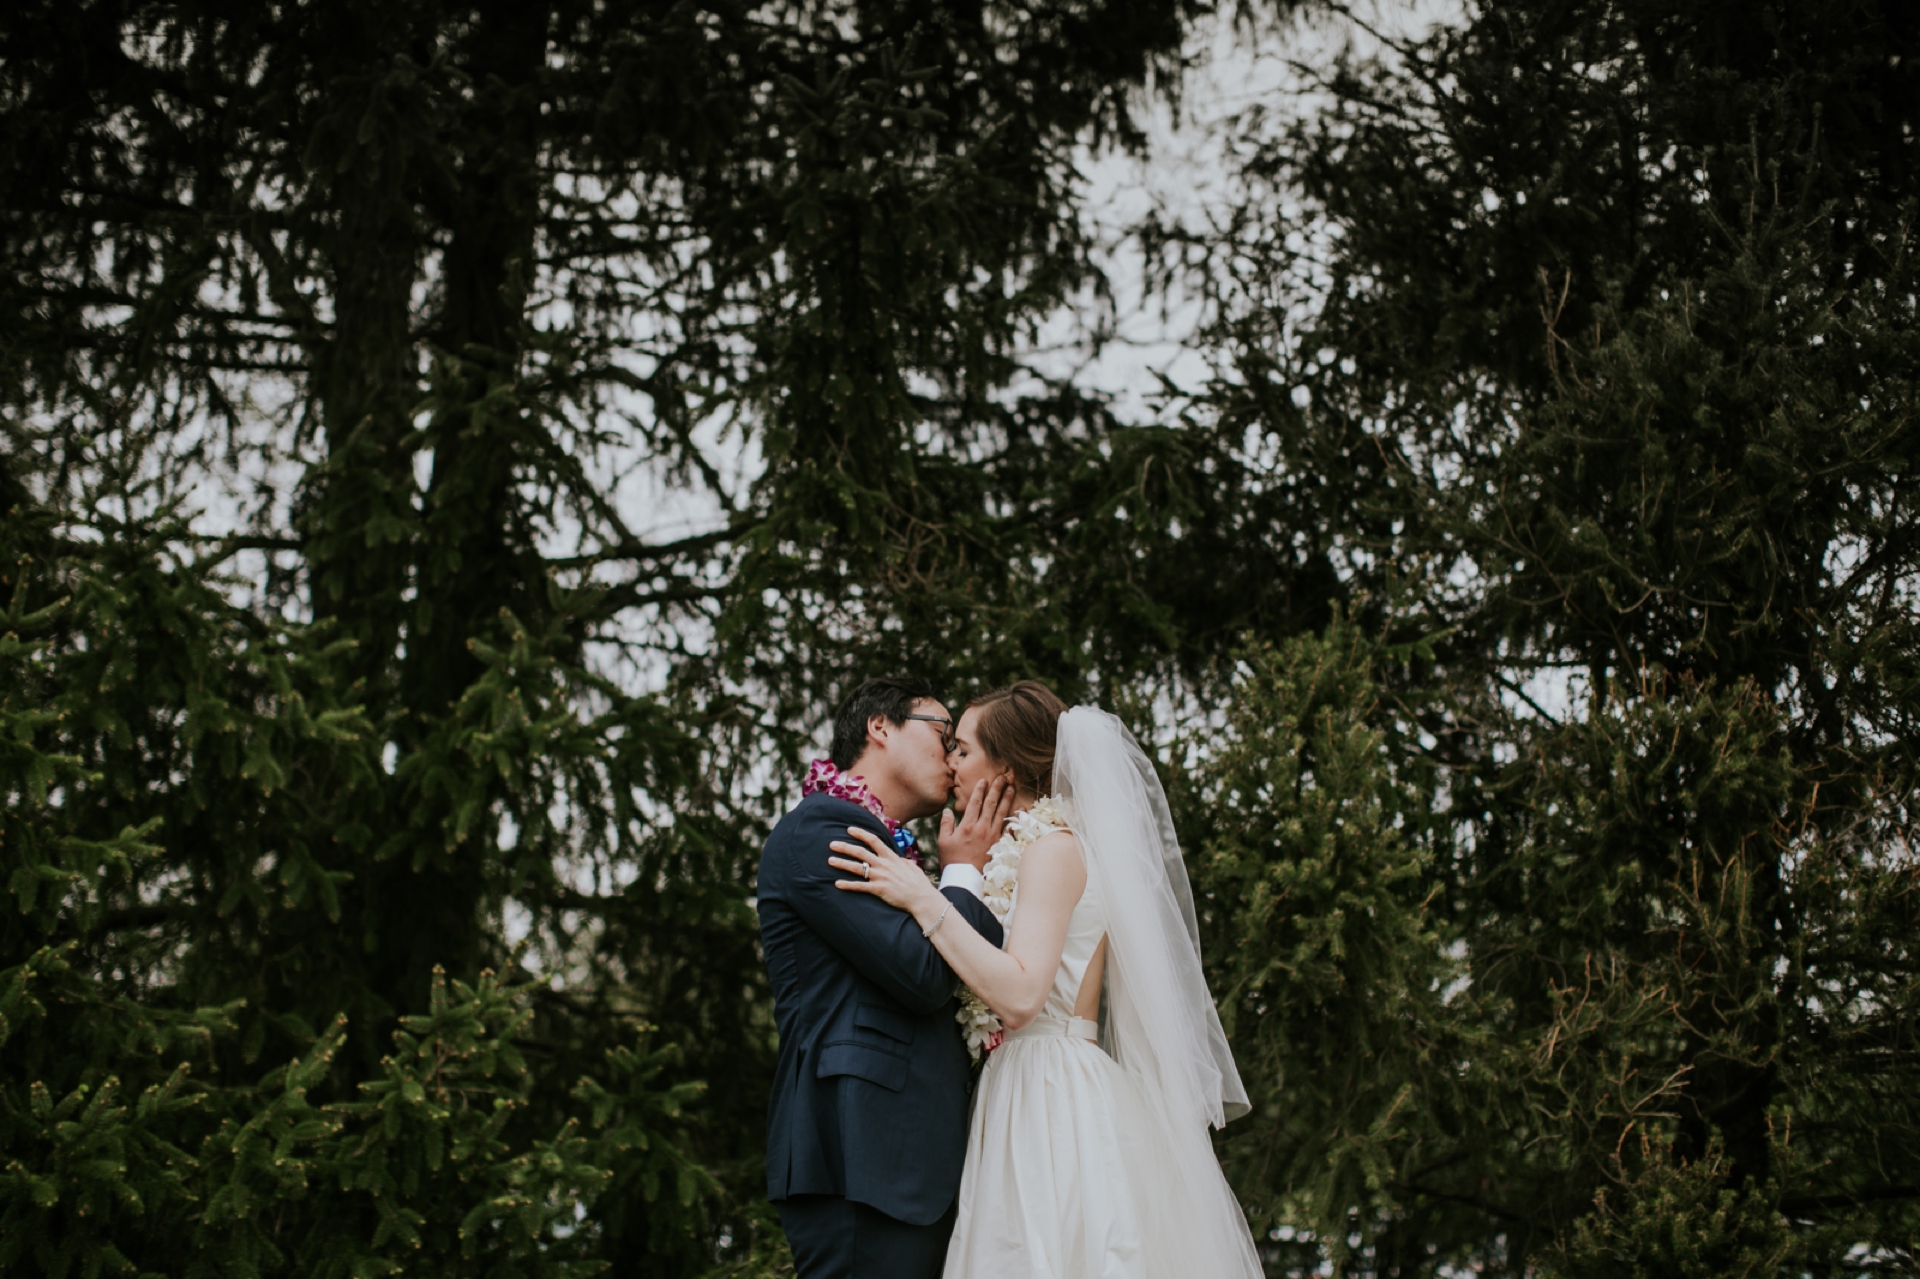 a groom with a lei kisses a bride in front of the boughs of an evergreen tree